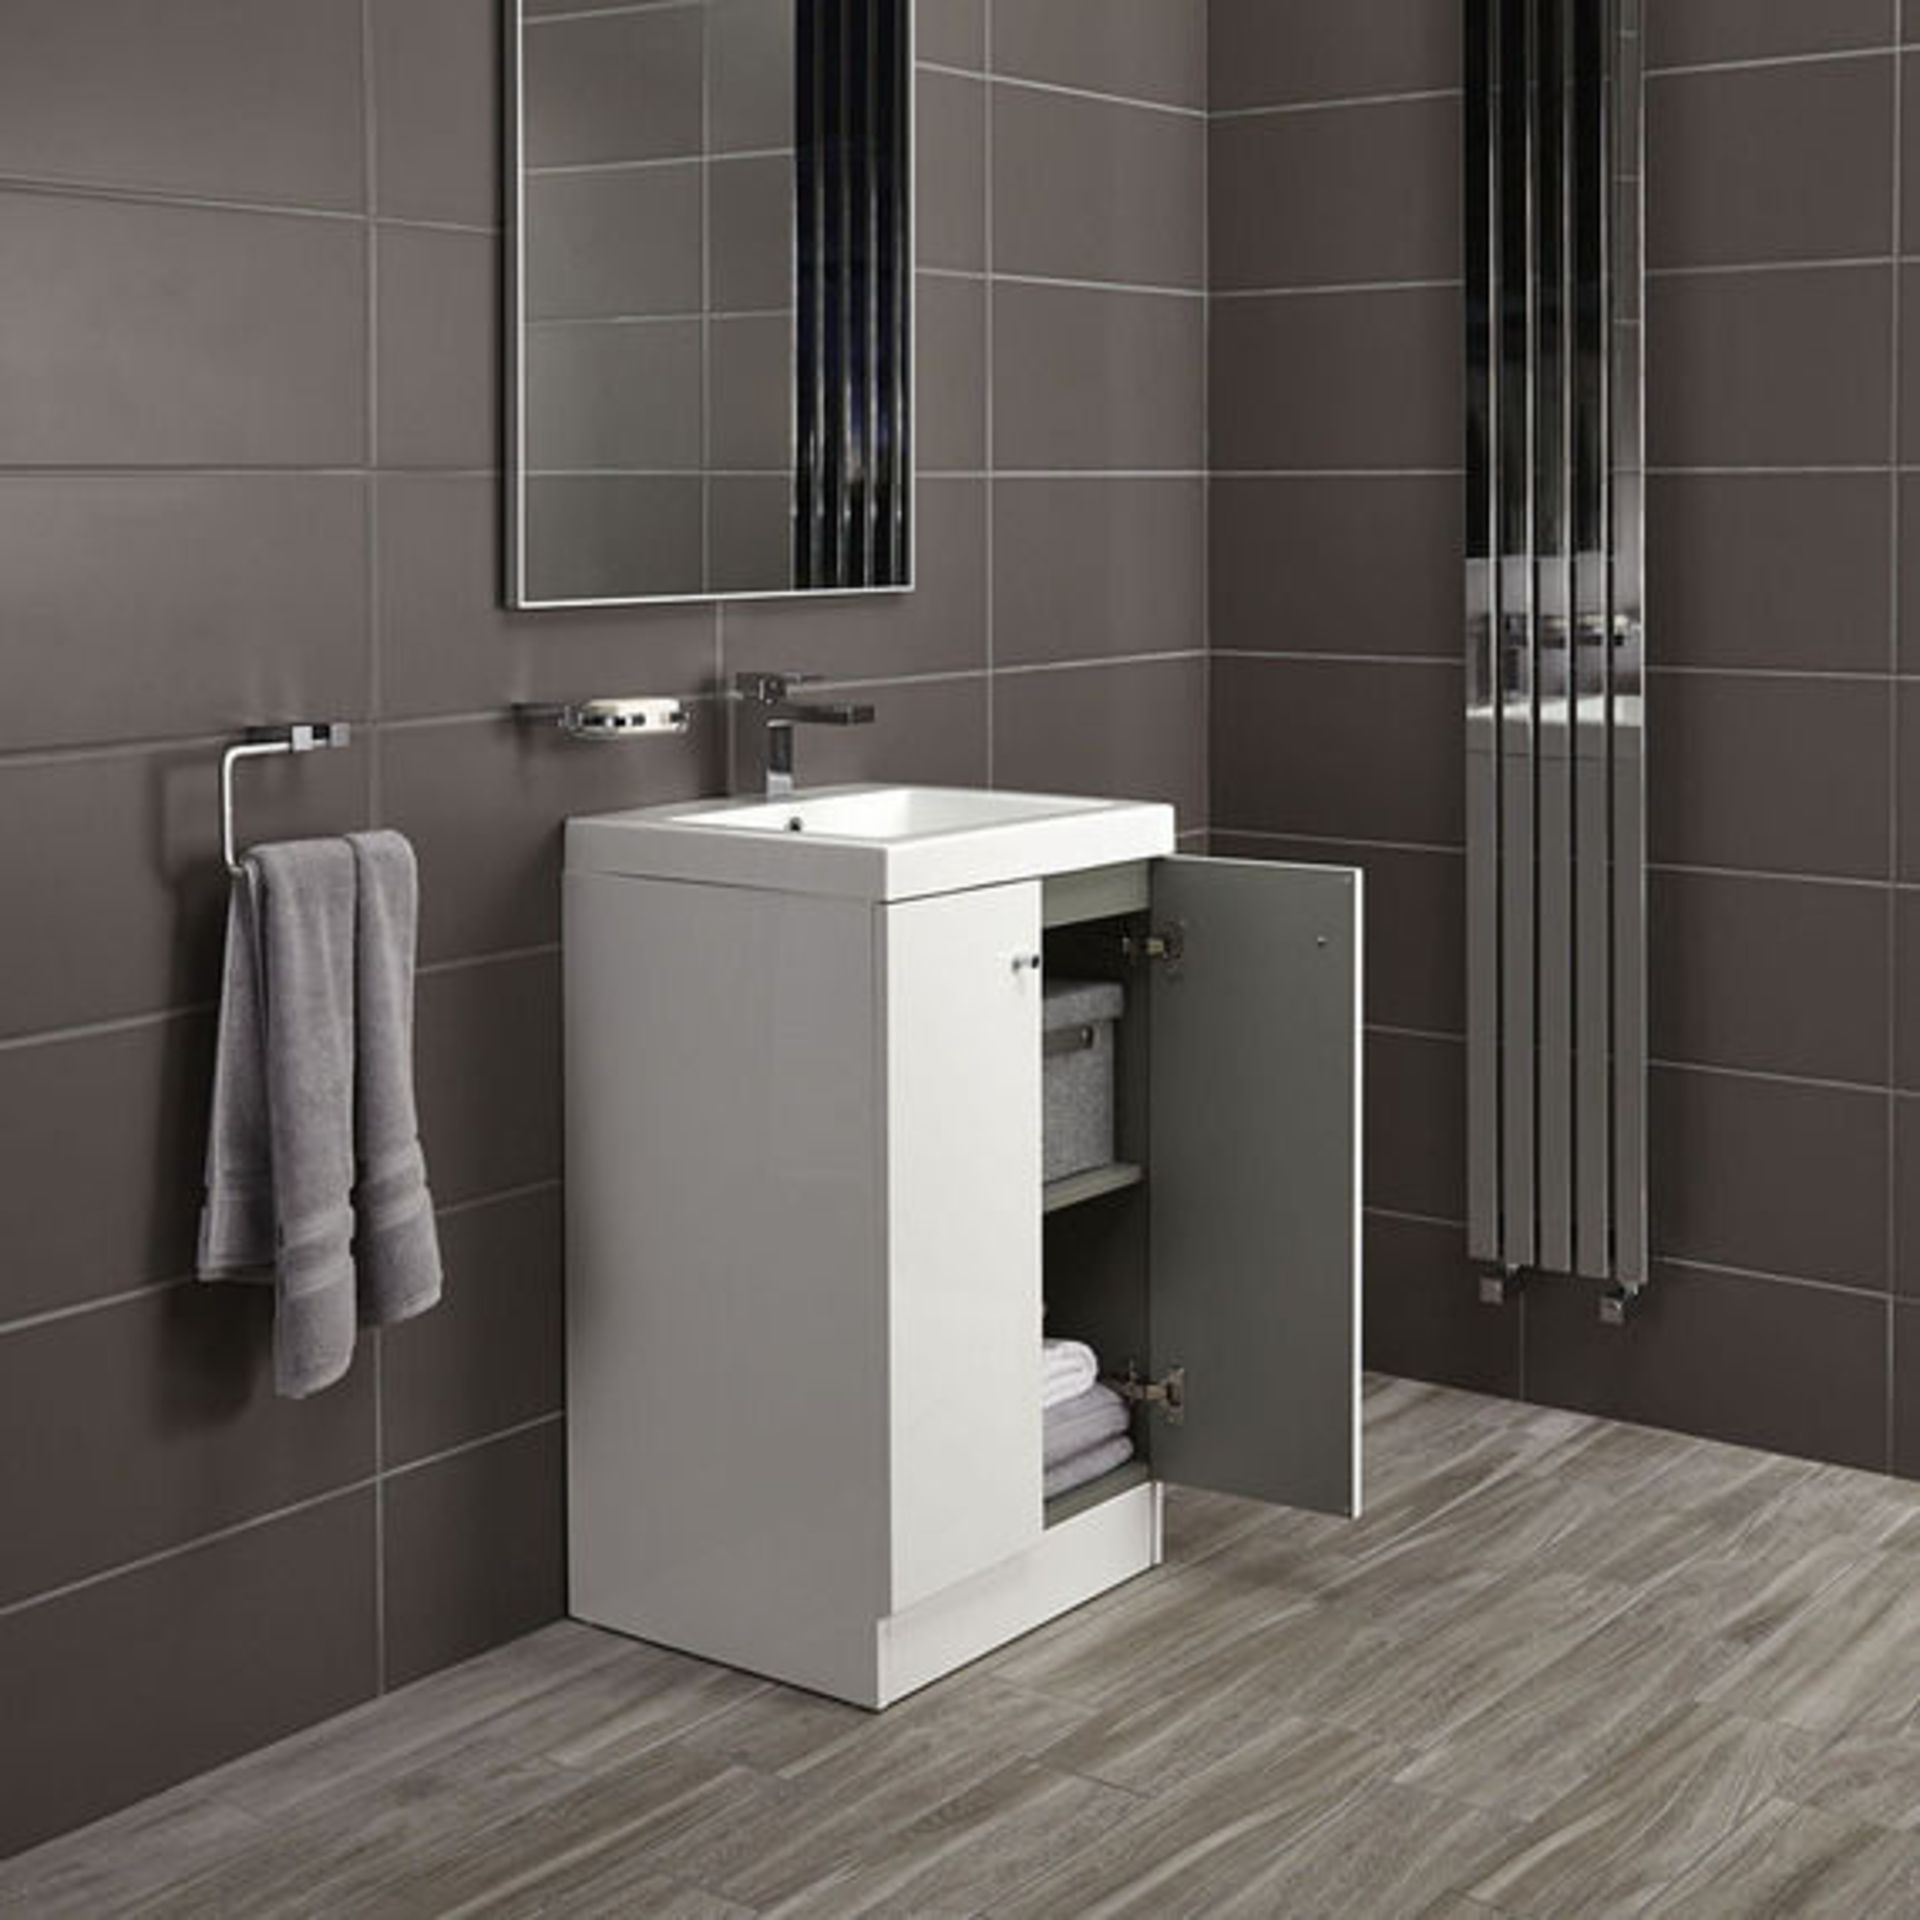 10 x Alpine Duo 500 Floor Standing Vanity Unit - Gloss White - Brand New Boxed Stock - Dimensions: - Image 4 of 4